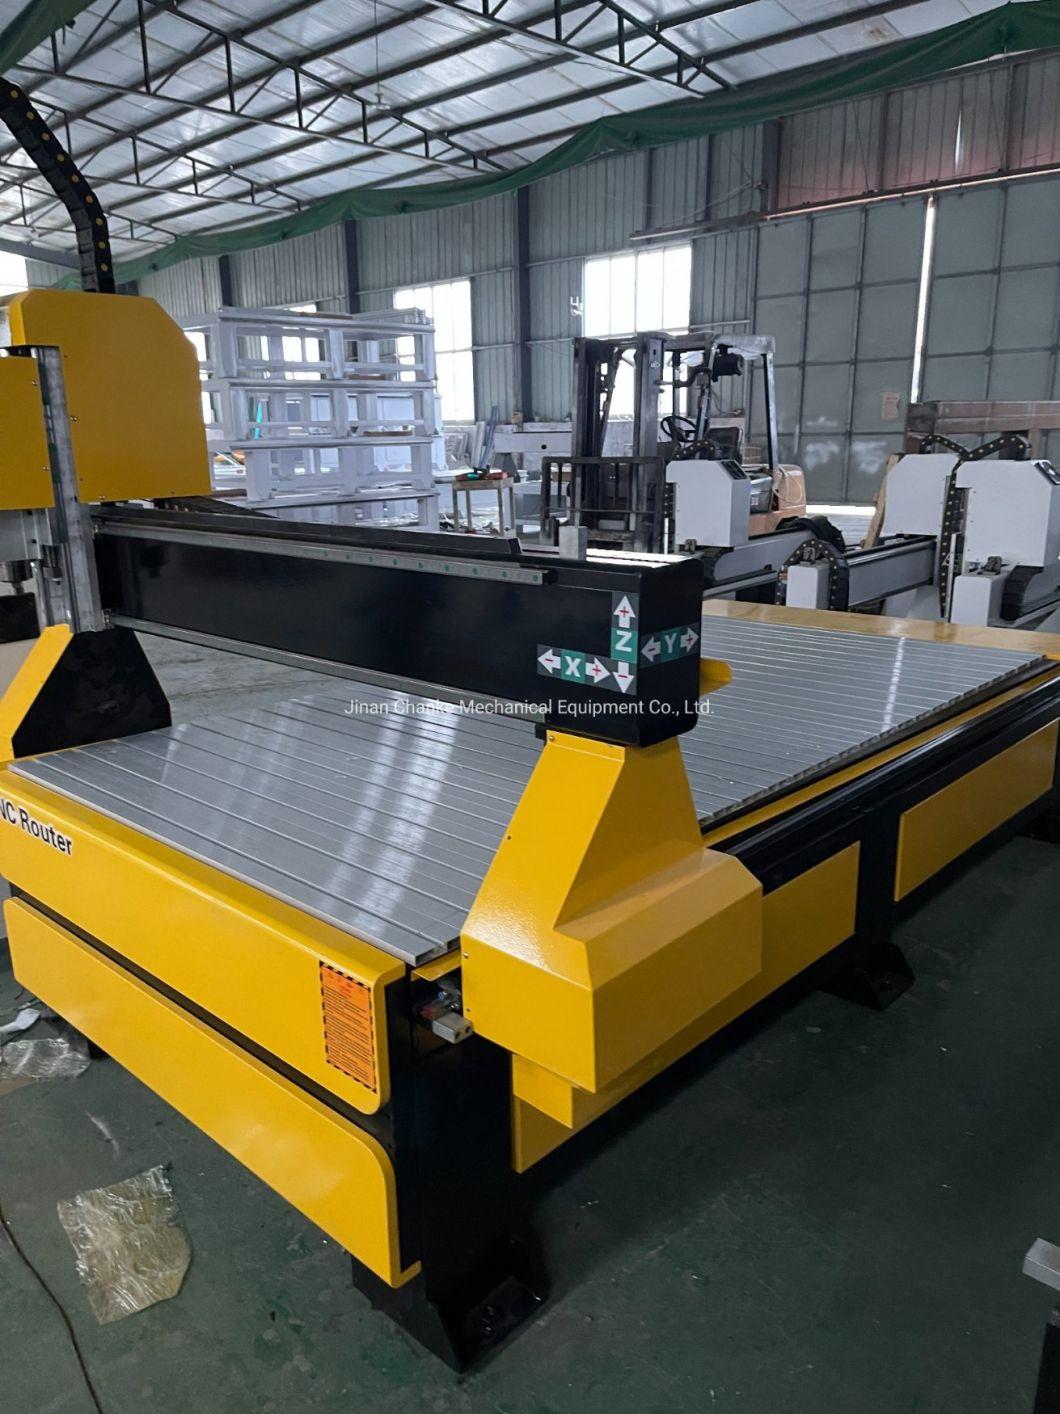 China CNC Routers 1325 3D CNC Milling Machine CNC Woodworking Machine for Furniture Metal